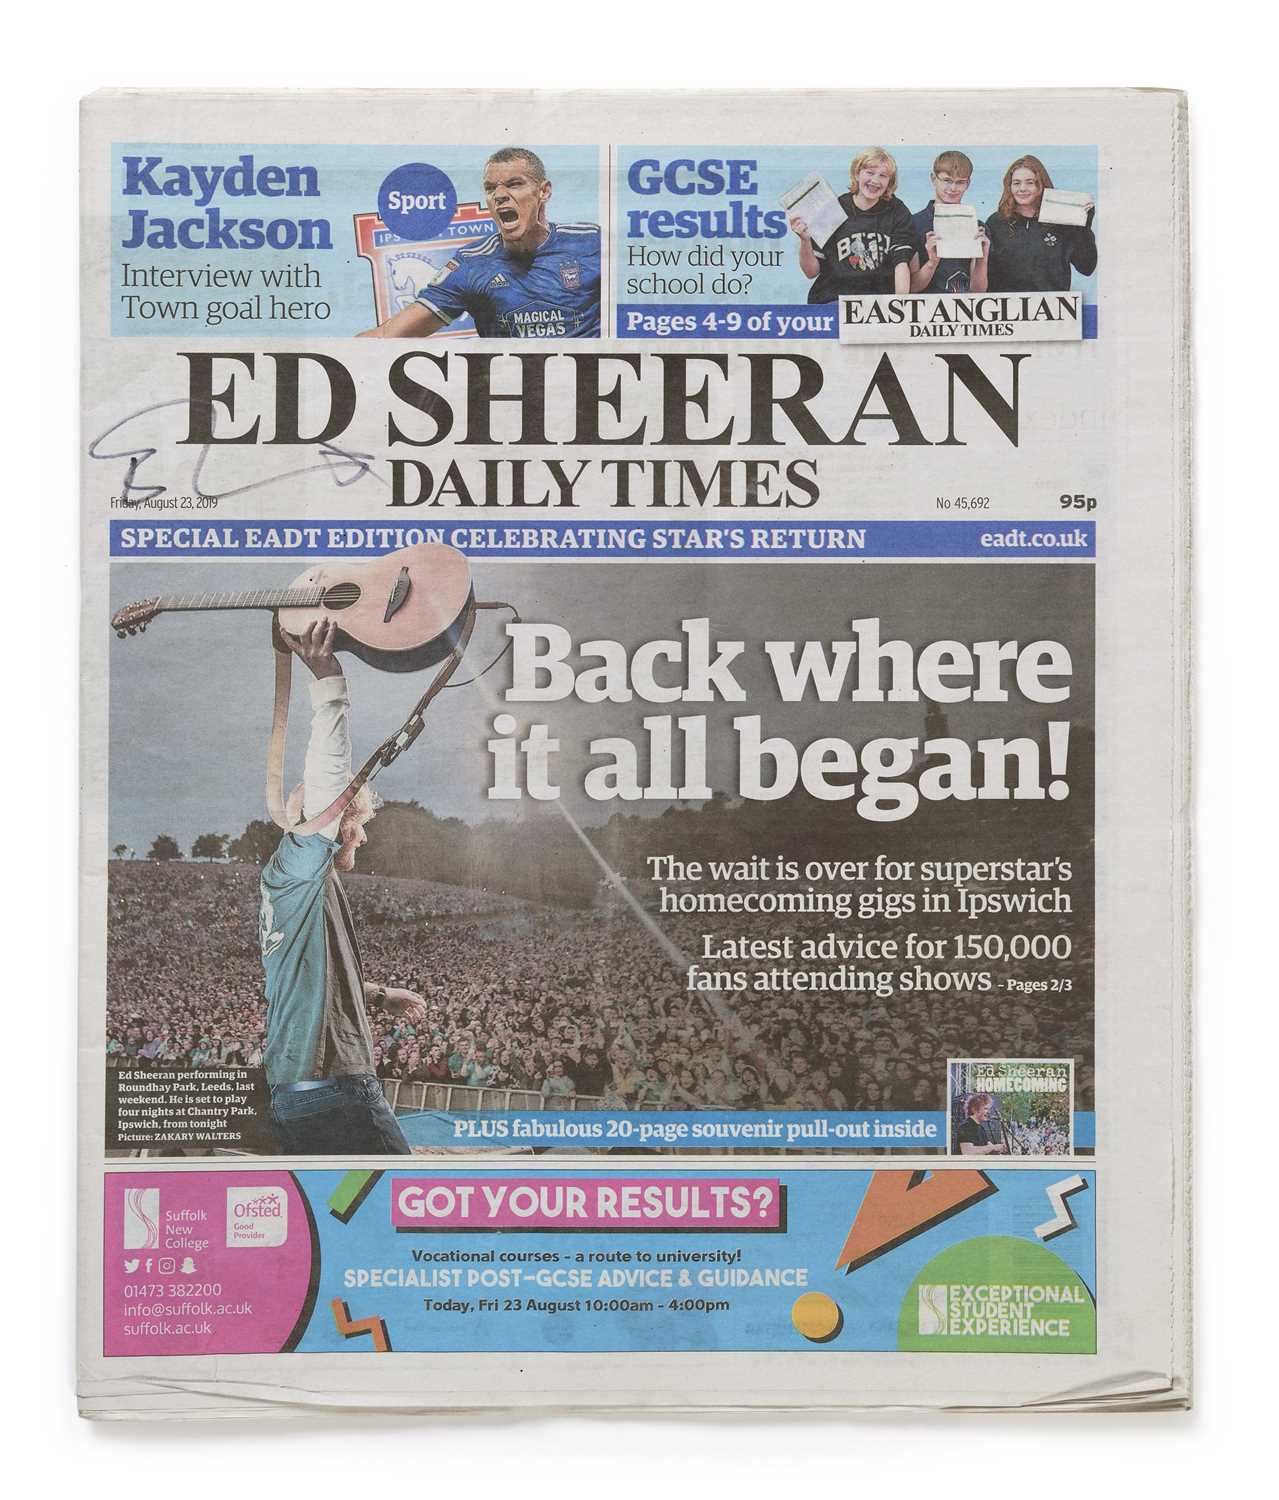 Signed Ed Sheeran Daily Times Newspaper, Friday 23 August 2019 An original copy of The East